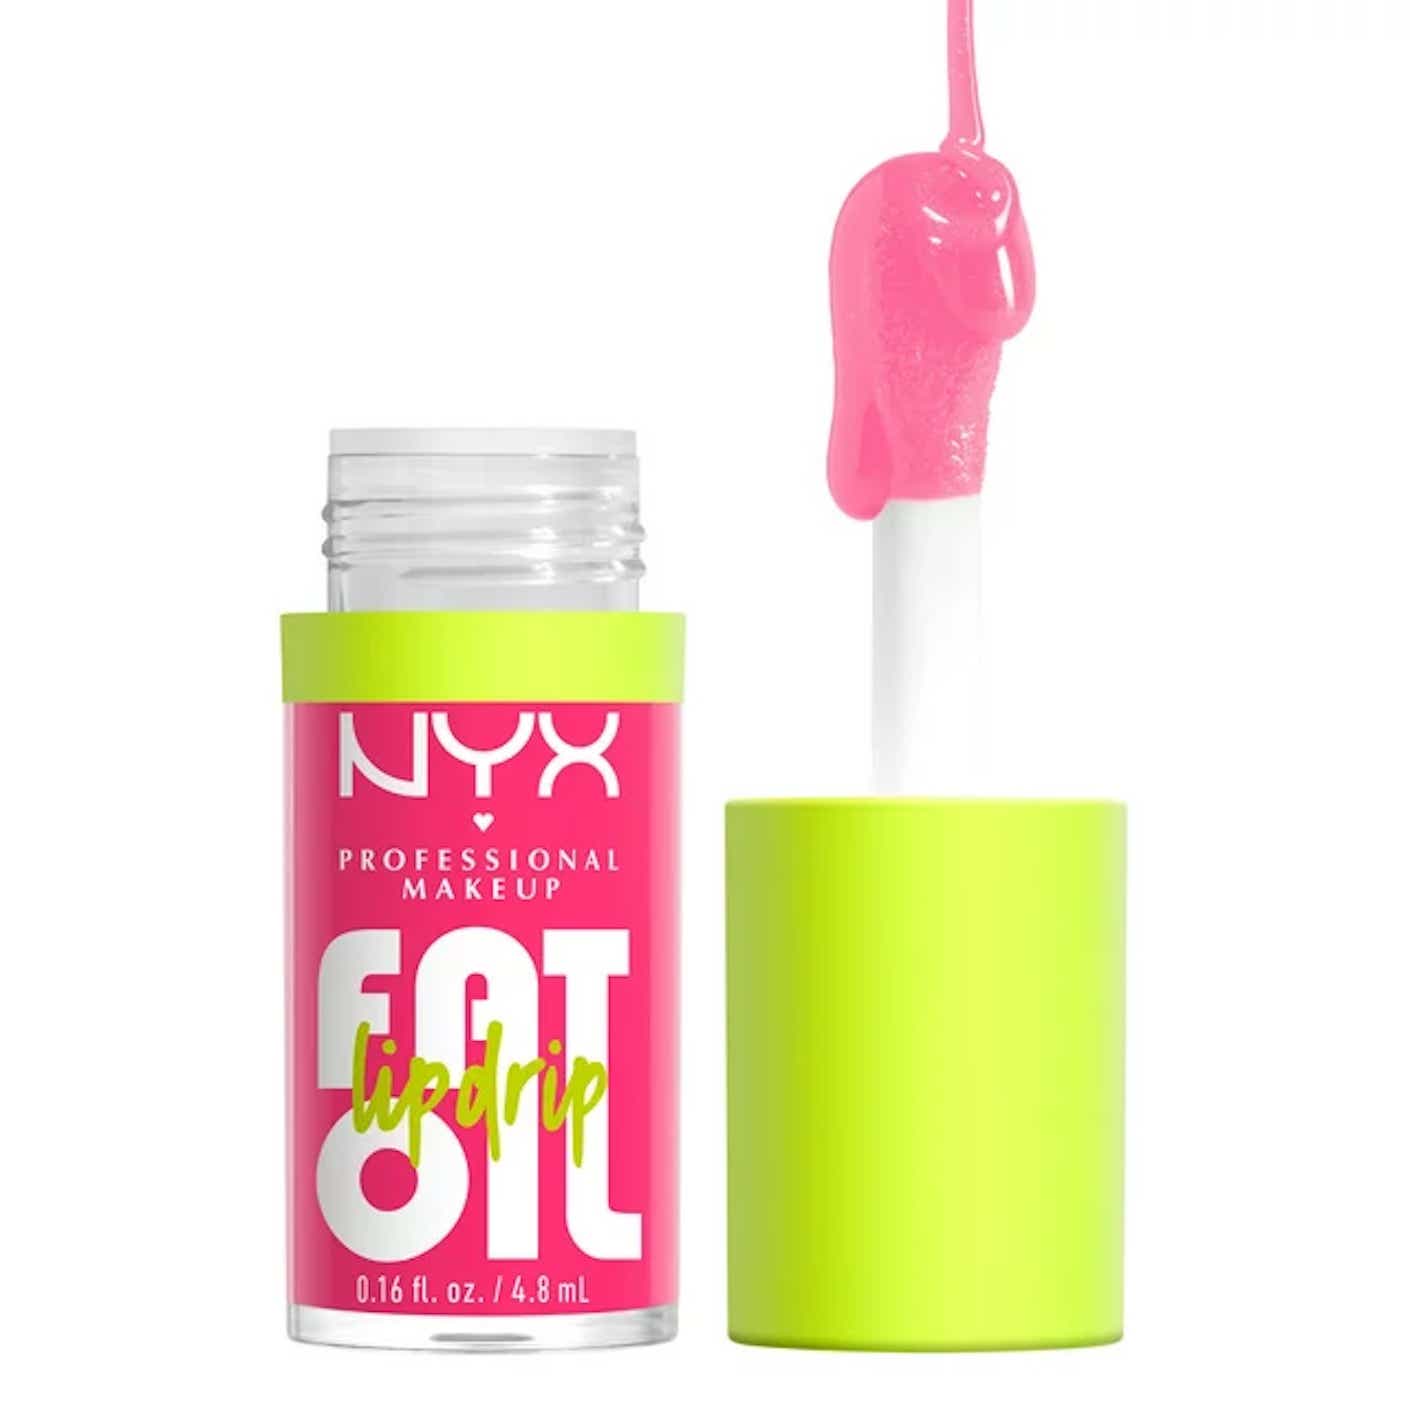 A small container of bright pink lip gloss.